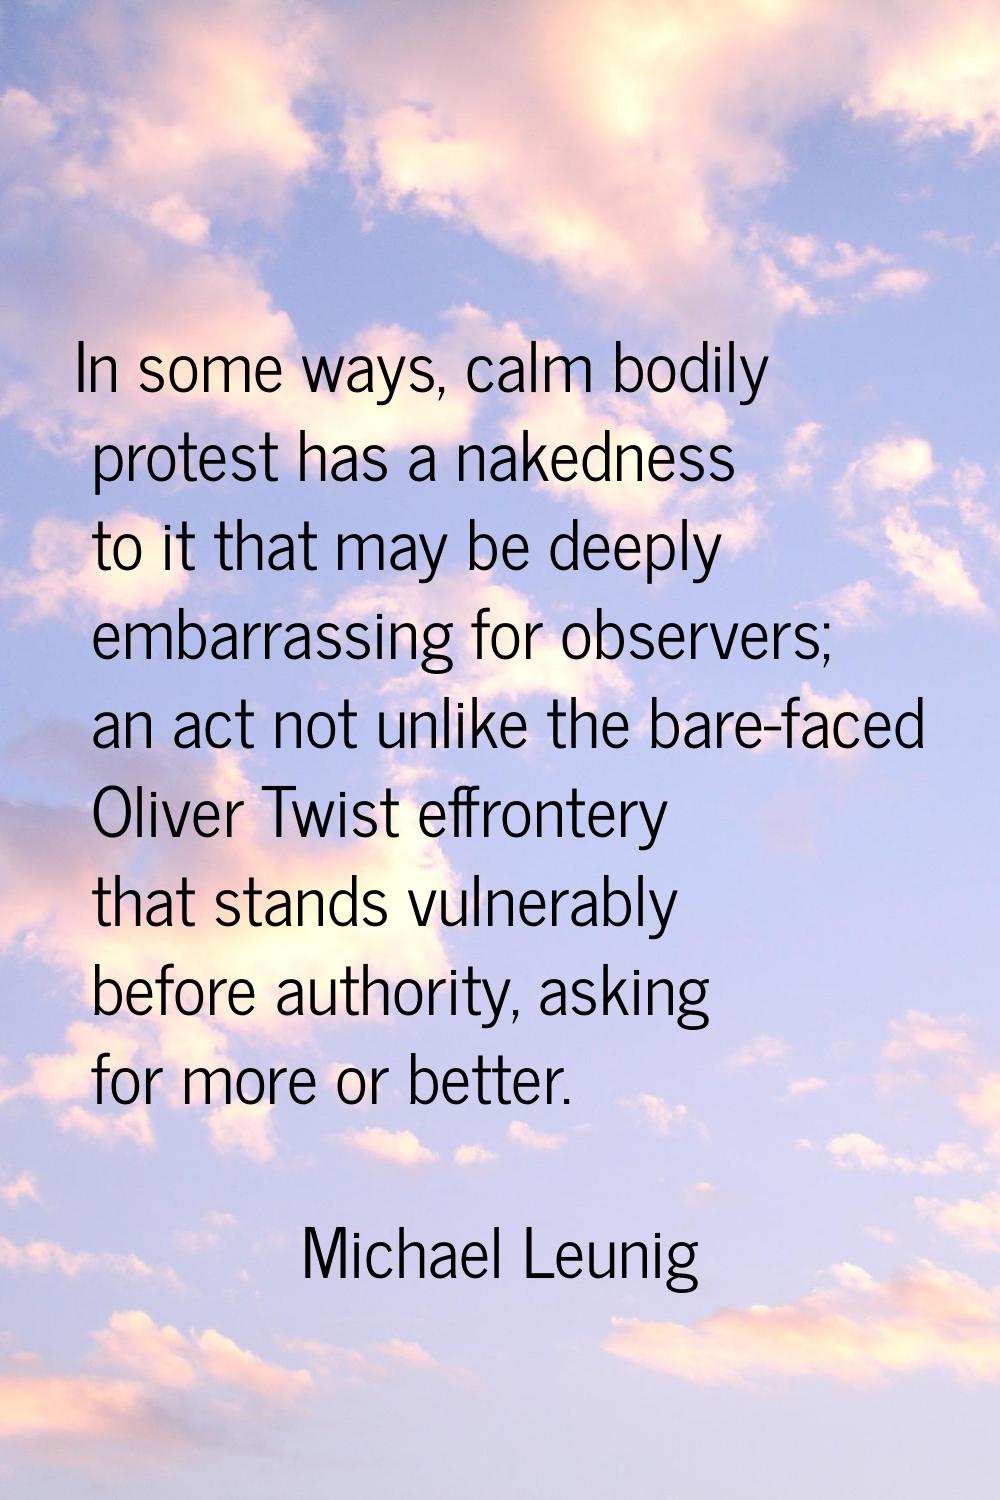 In some ways, calm bodily protest has a nakedness to it that may be deeply embarrassing for observe